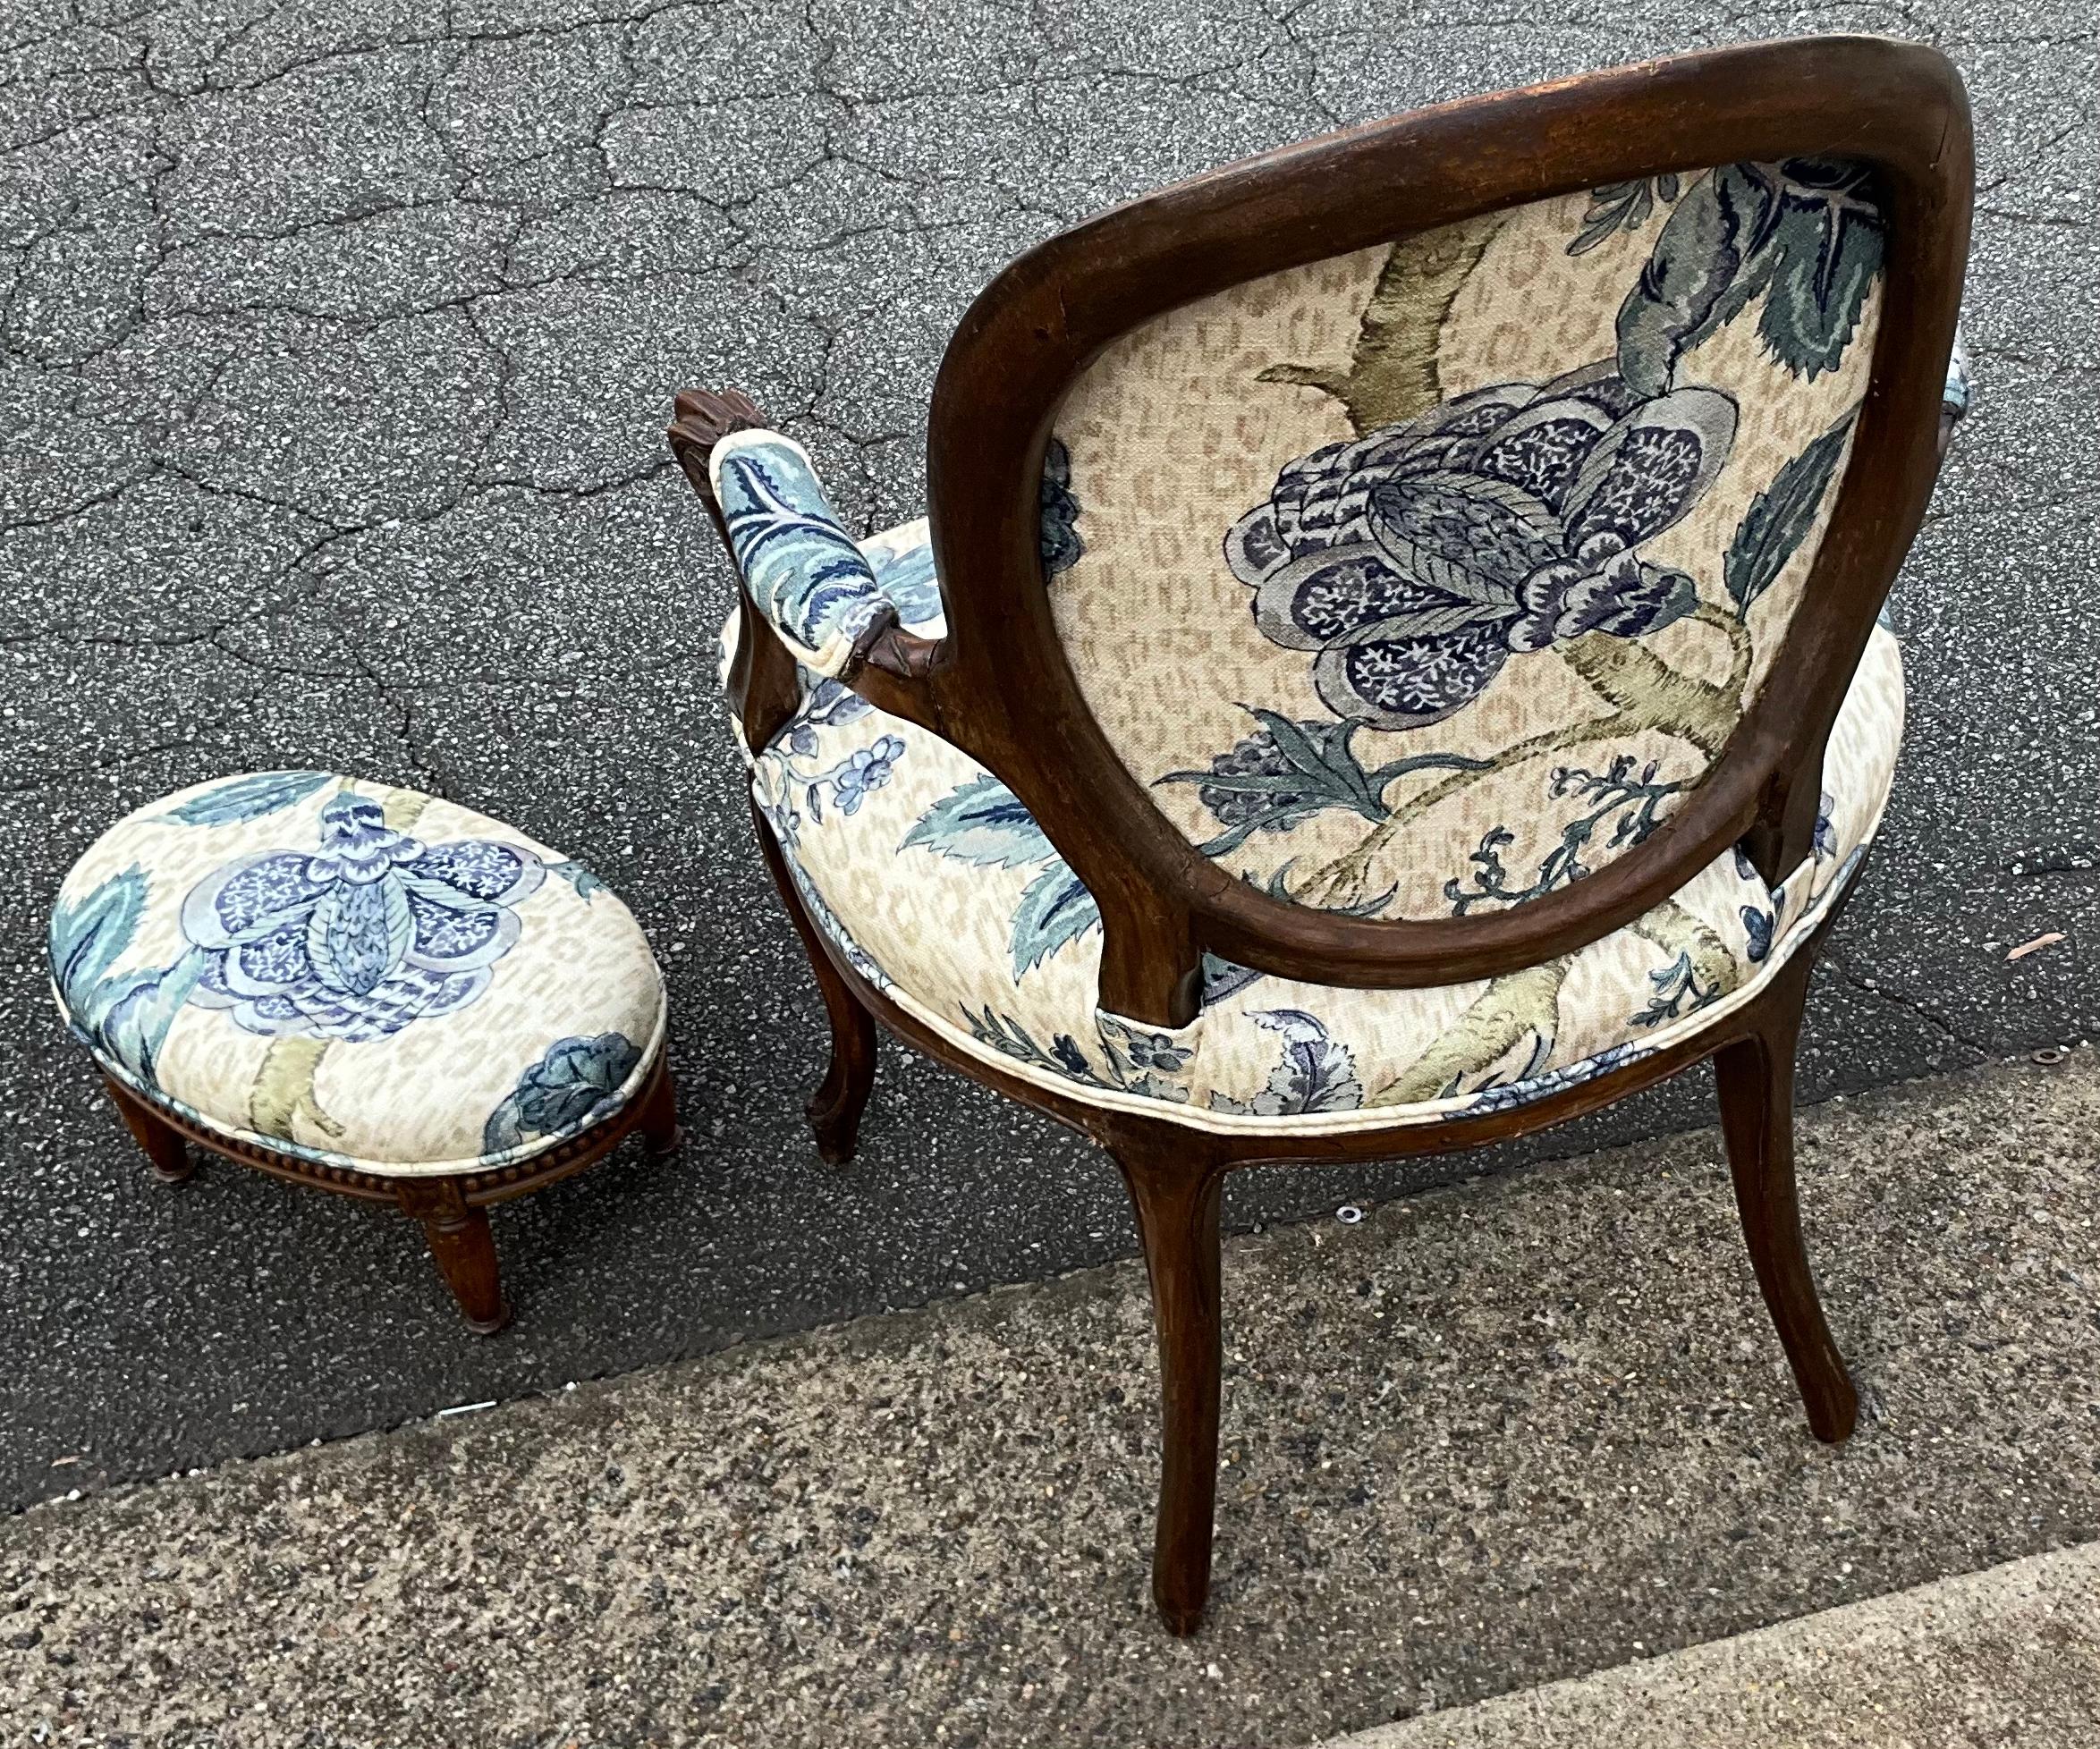 Louis XV Antique French Fruitwood Berger Chair & Ottoman In Blue Floral & Leopard - S/2 For Sale